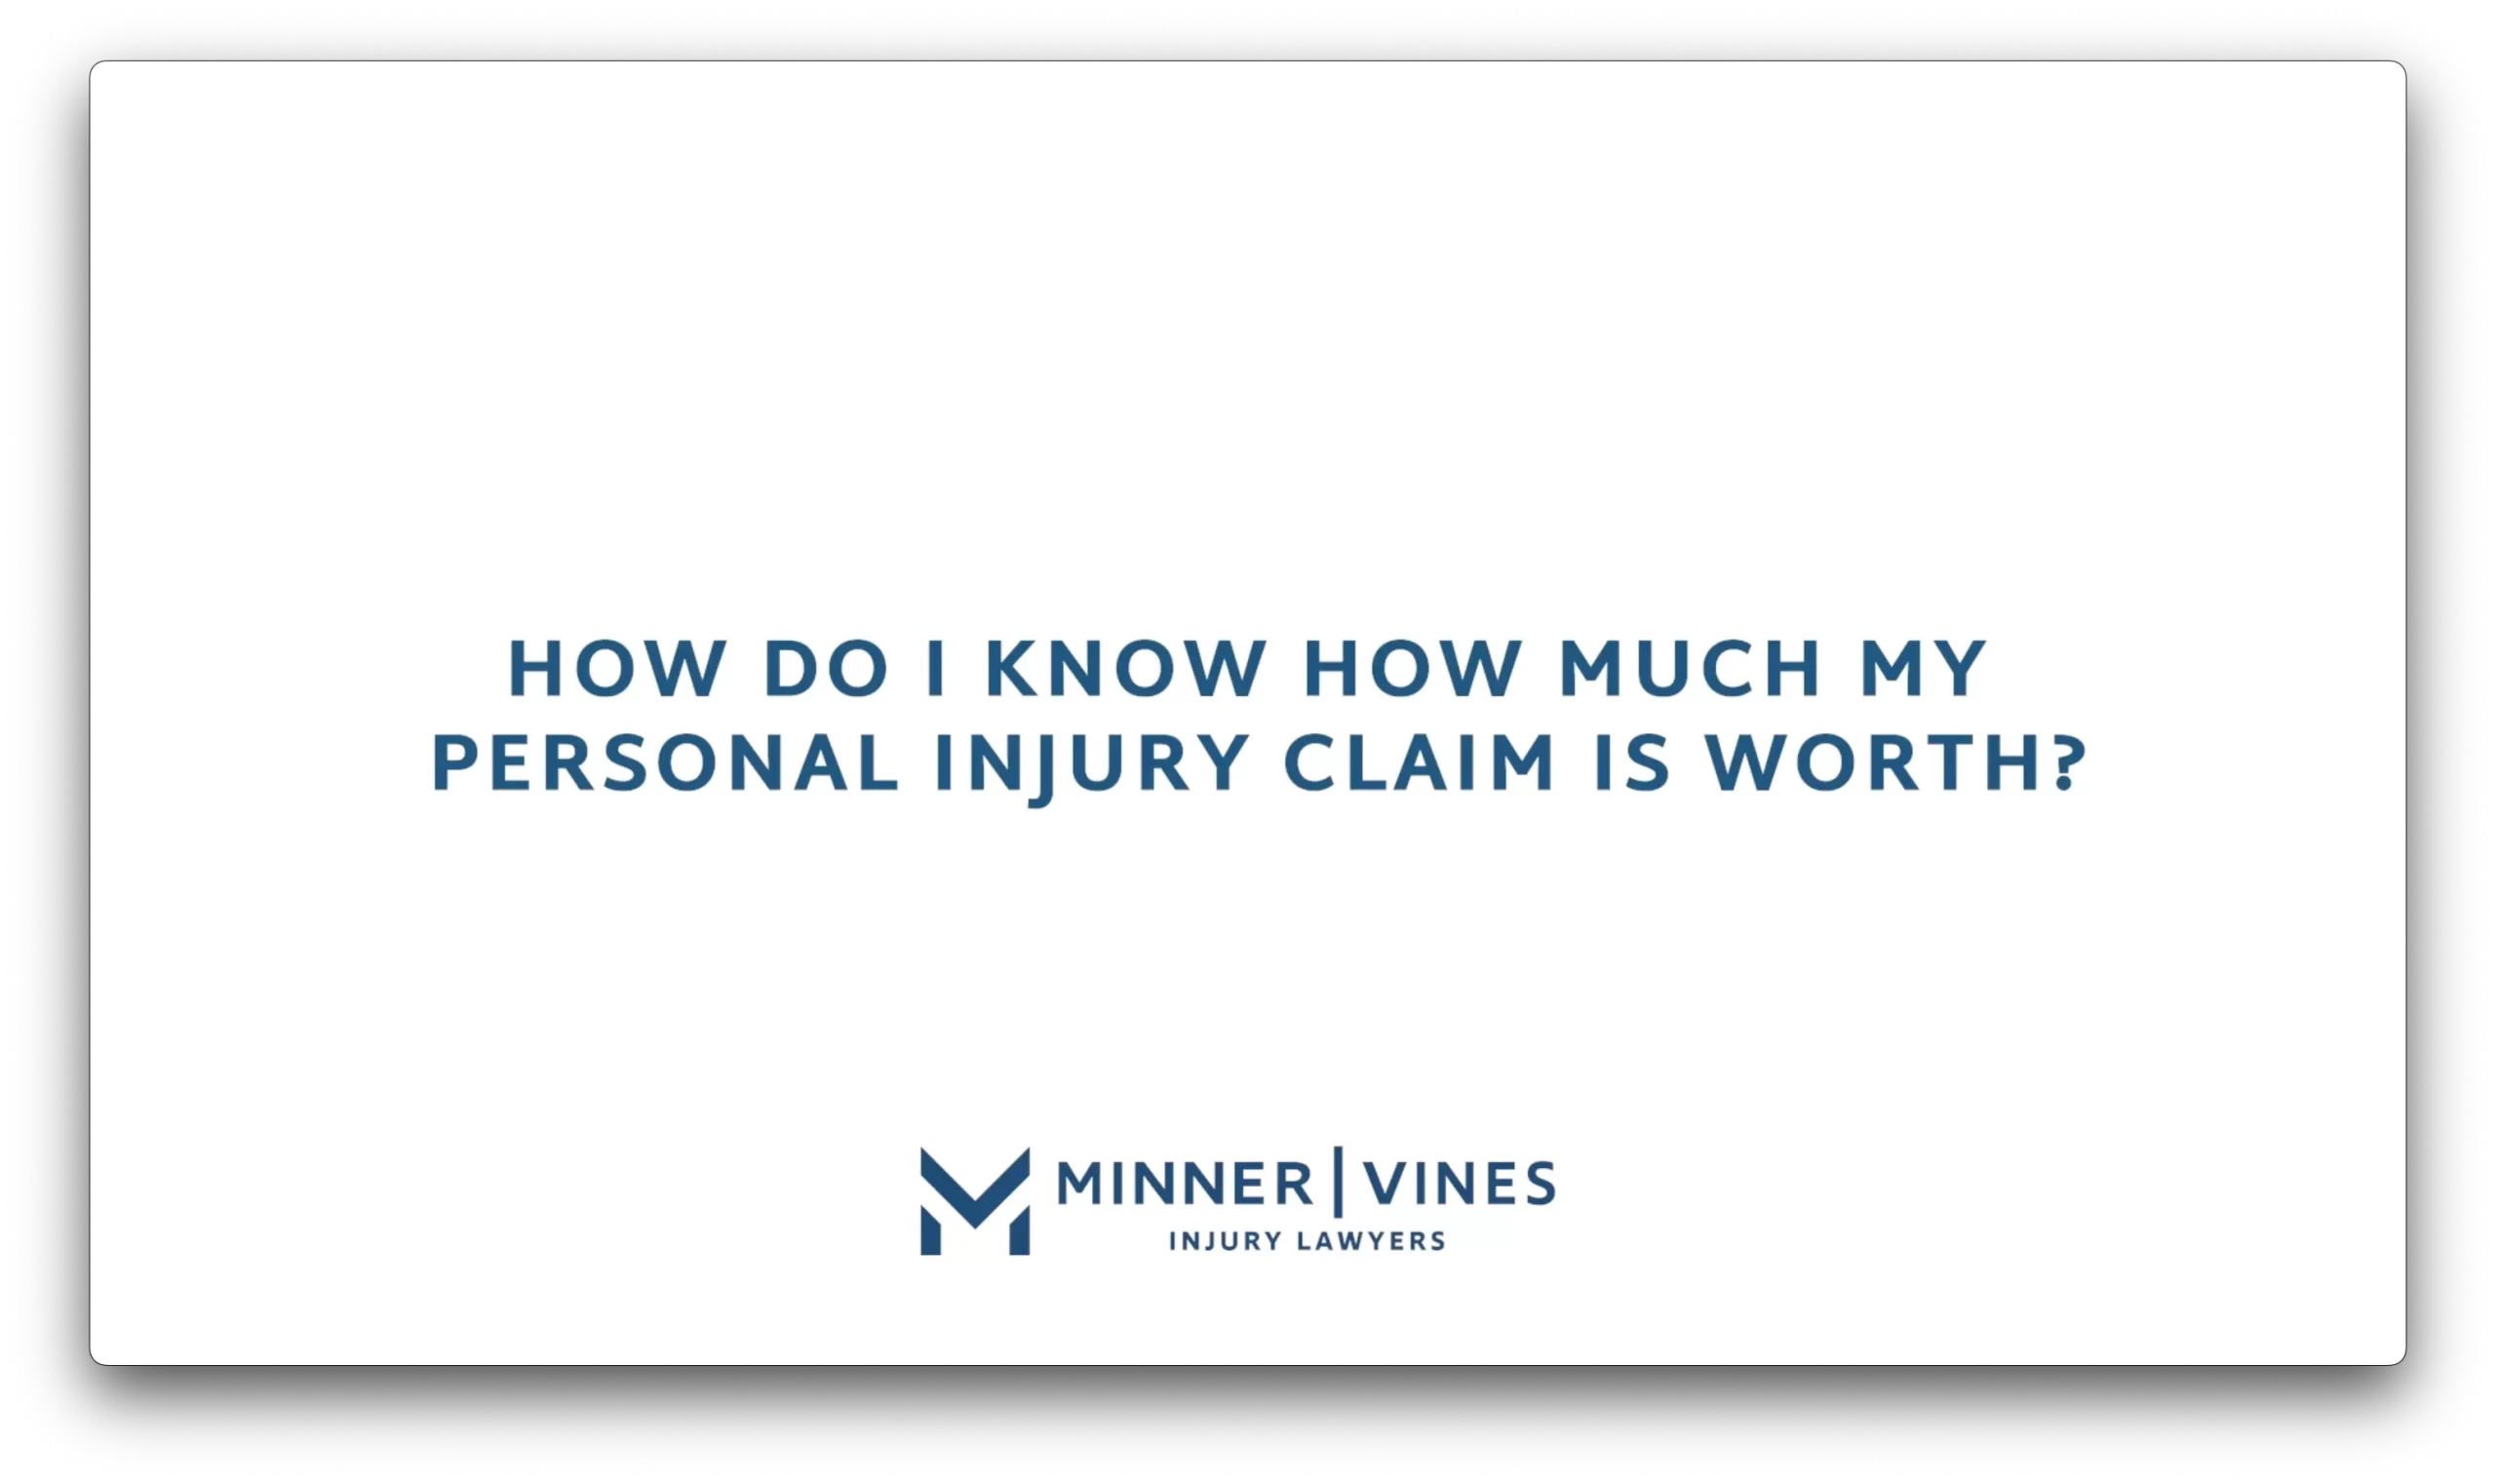 How do I know how much my personal injury claim is worth?